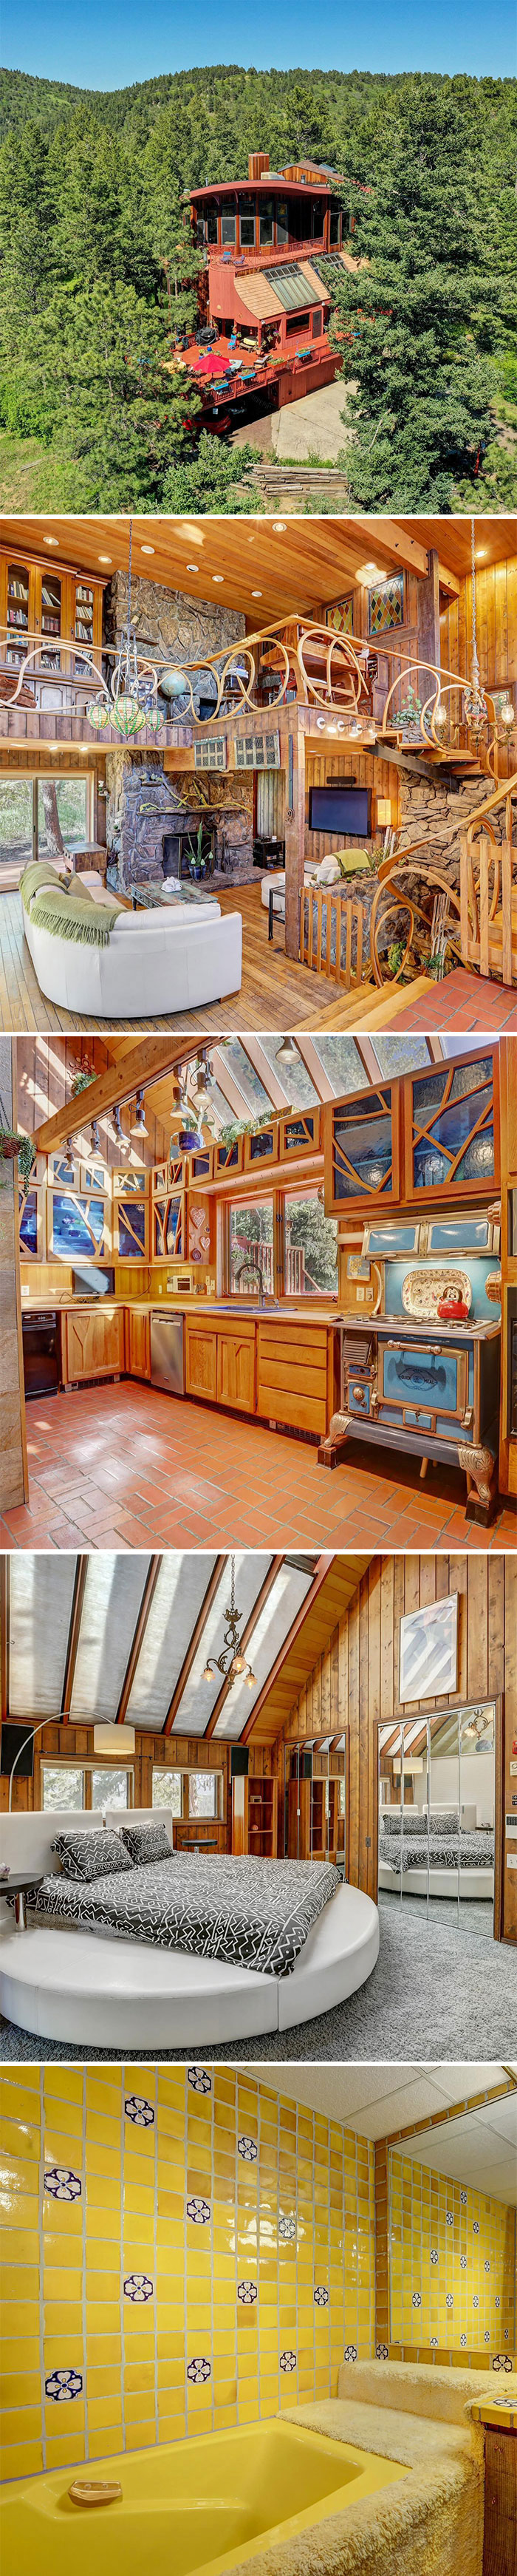 Here’s A Fun Estate In Morrison, Co That’s Just 30 Minutes From Downtown Denver That Is Being Offered For The First Time Ever. Per The Listing The Architect Is The Same Architect That Designed John Denver And Other Iconic Residences In The Area $2,850,000